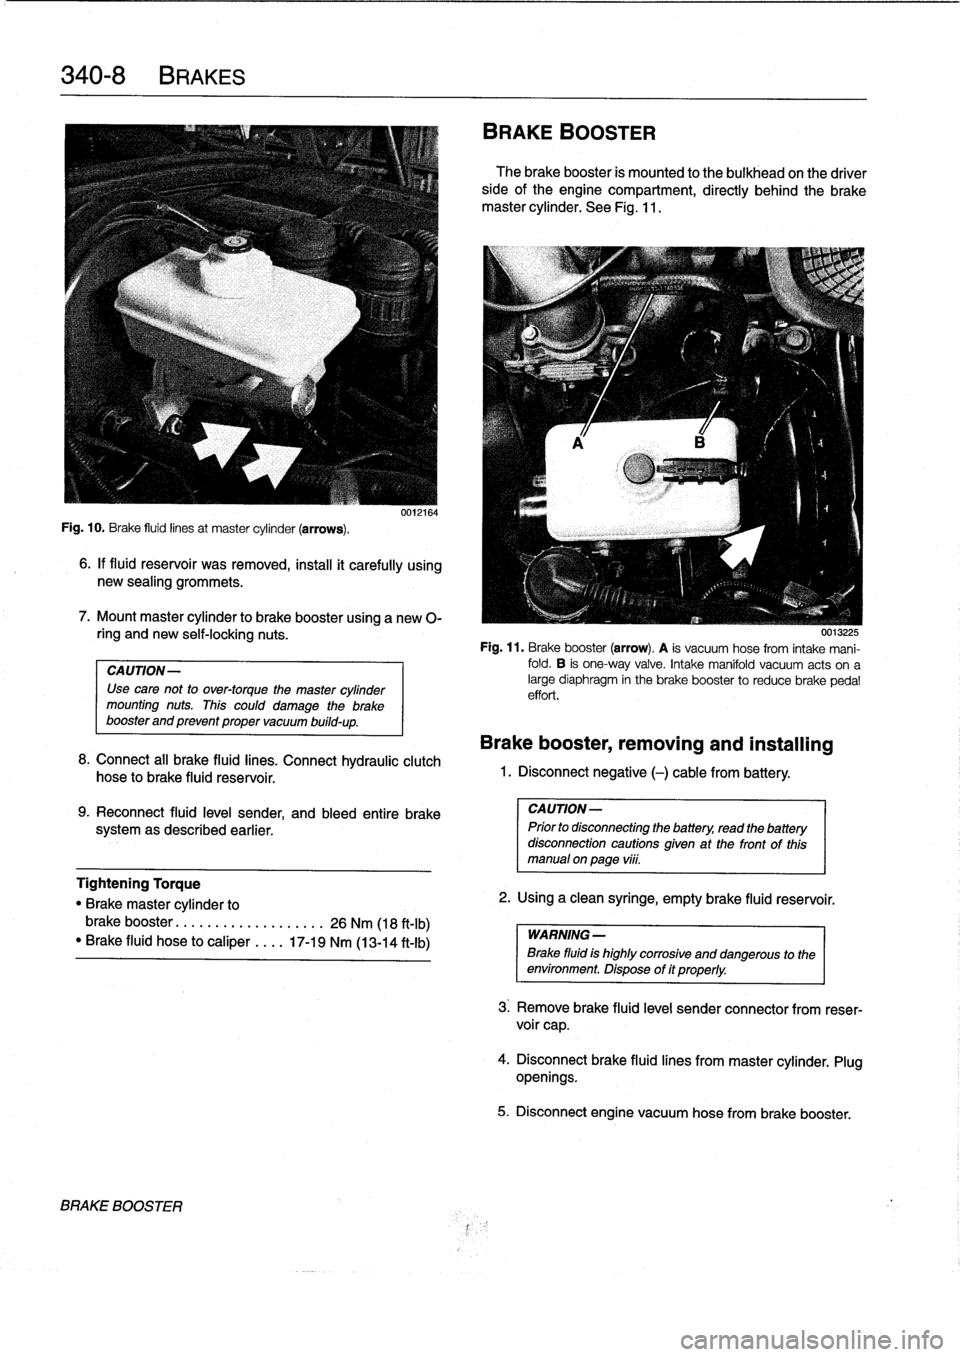 BMW 323i 1995 E36 Owners Guide 
340-
8
BRAKES

Fig
.
10
.
Brake
fluid
linesat
master
cylinder
(arrows)
.

6
.
If
fluid
reservoir
was
removed,
install
it
carefully
using
new
sealing
grommets
.

7
.
Mount
master
cylinder
to
brake
boo